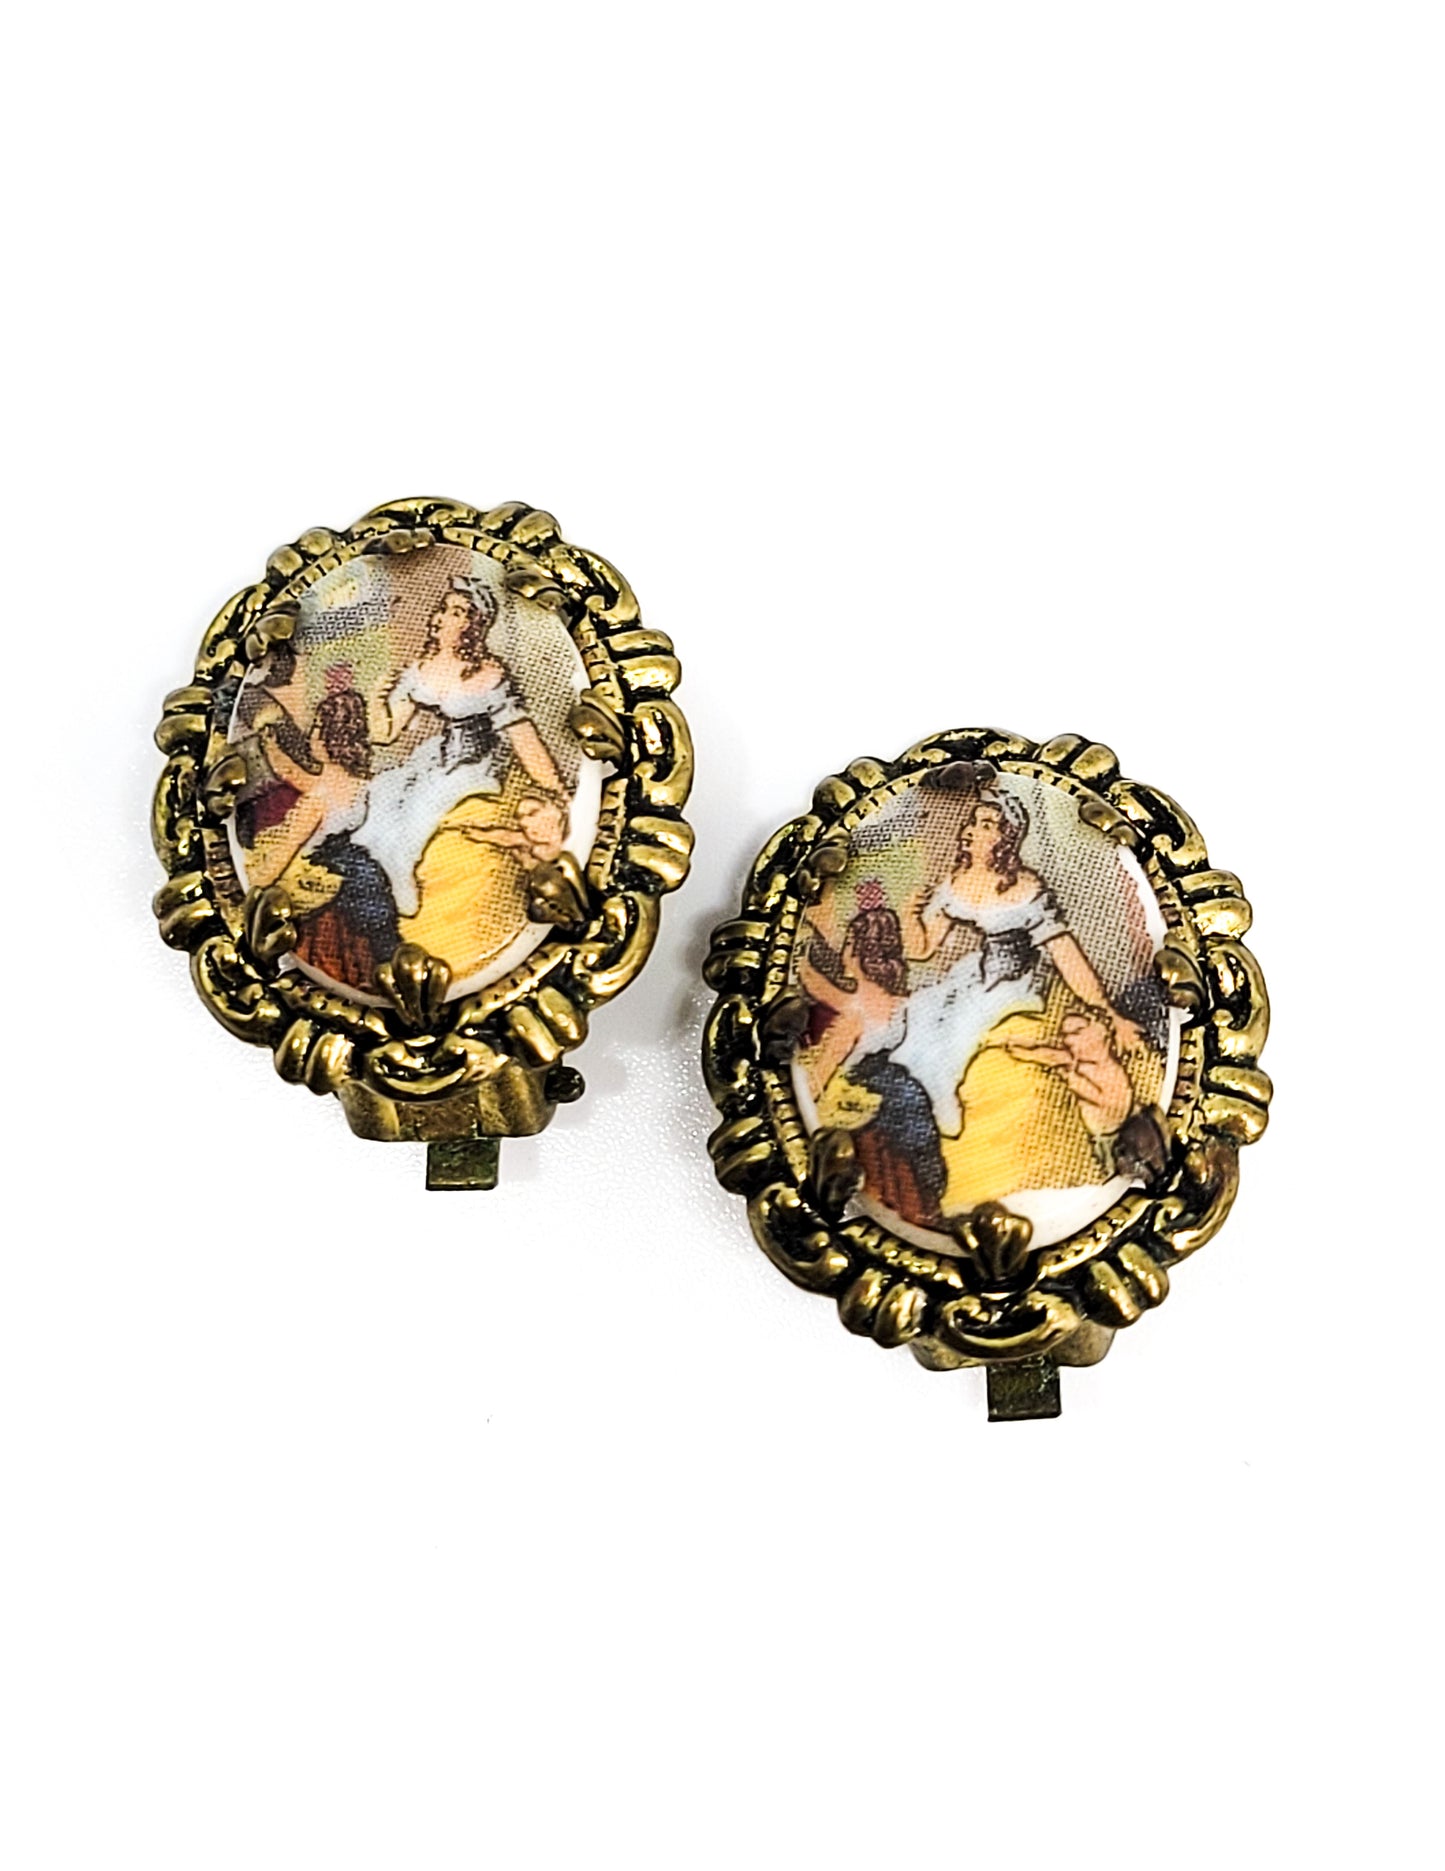 West Germany courting couple transferware vintage clip on earrings